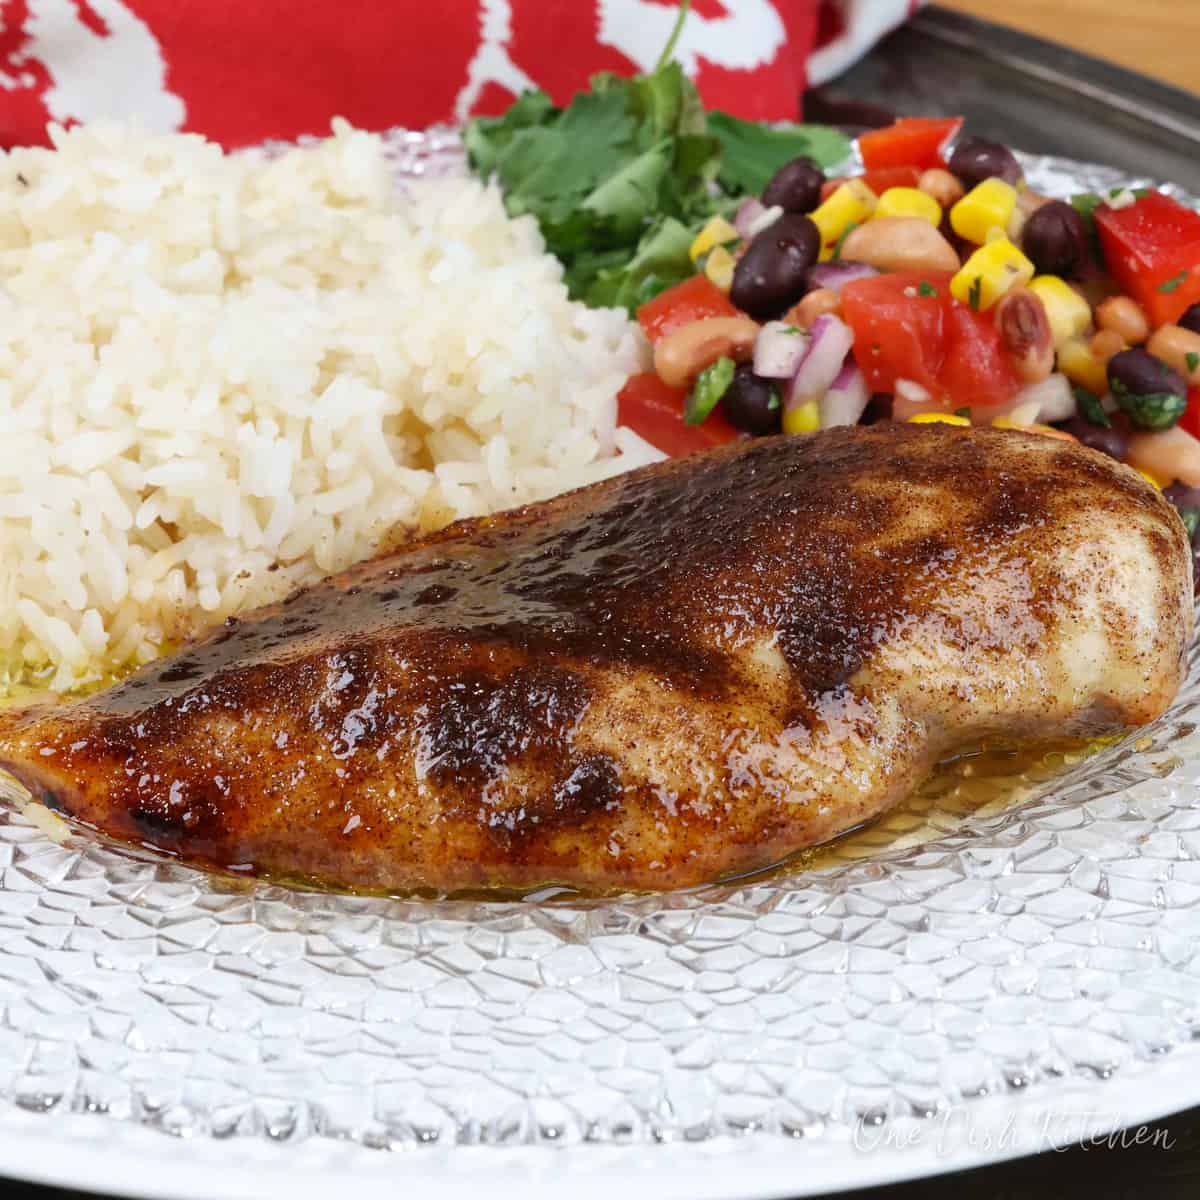 a chicken breast coated with jerk seasoning on a white plate next to a red napkin